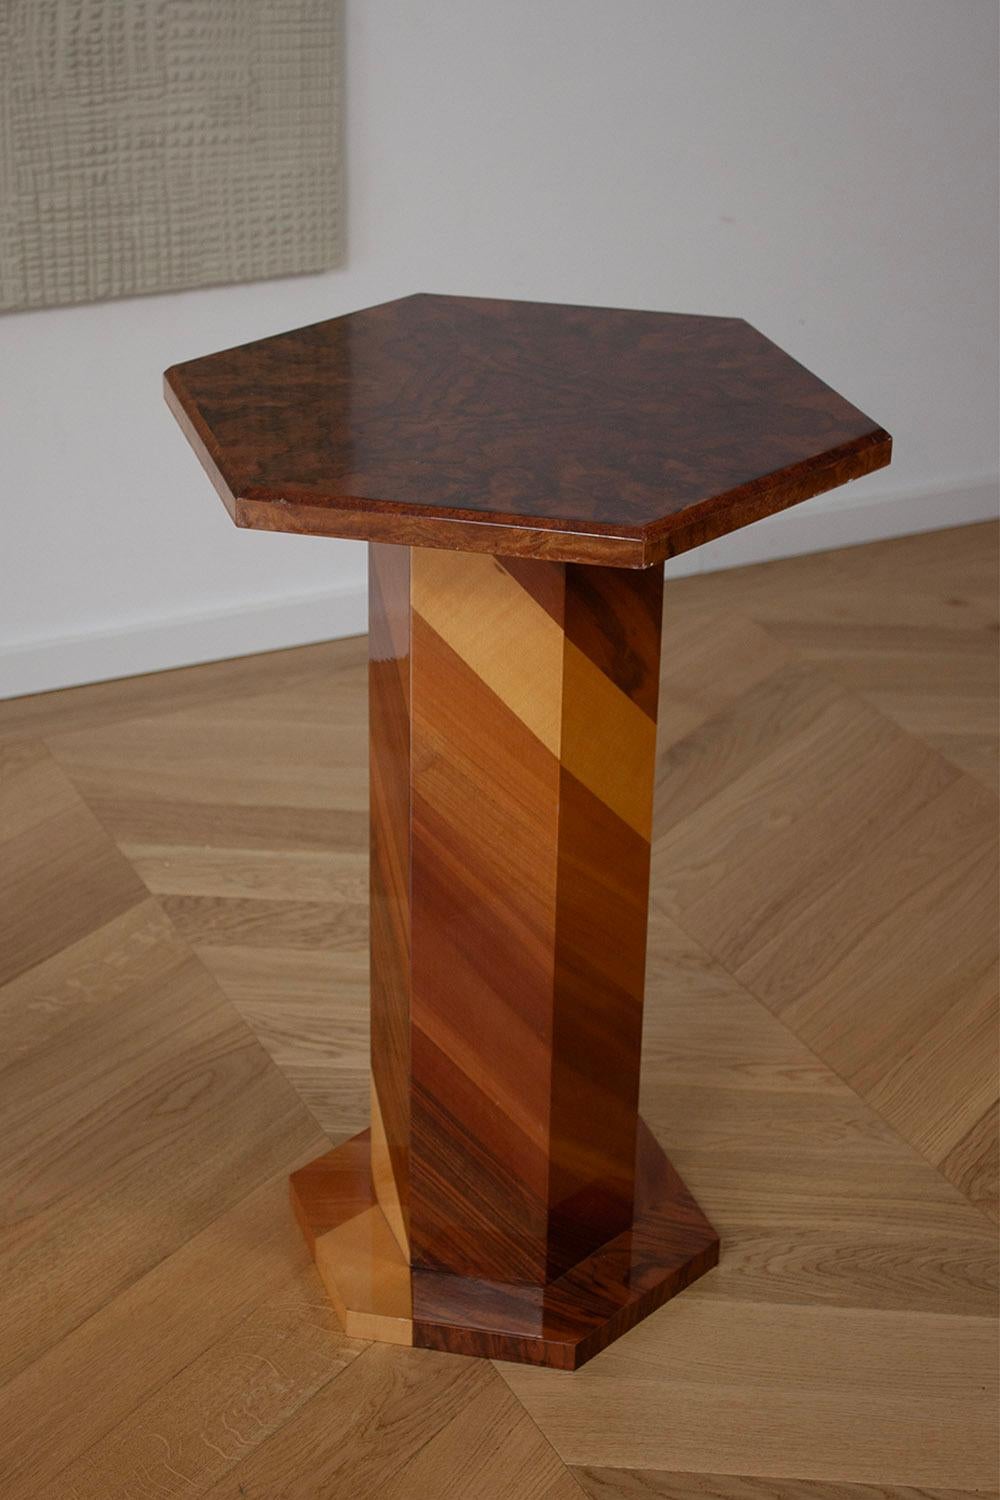 20th Century Striped Artisan Made Wooden Column Table Side Table Pedestal with Burl wood Top For Sale